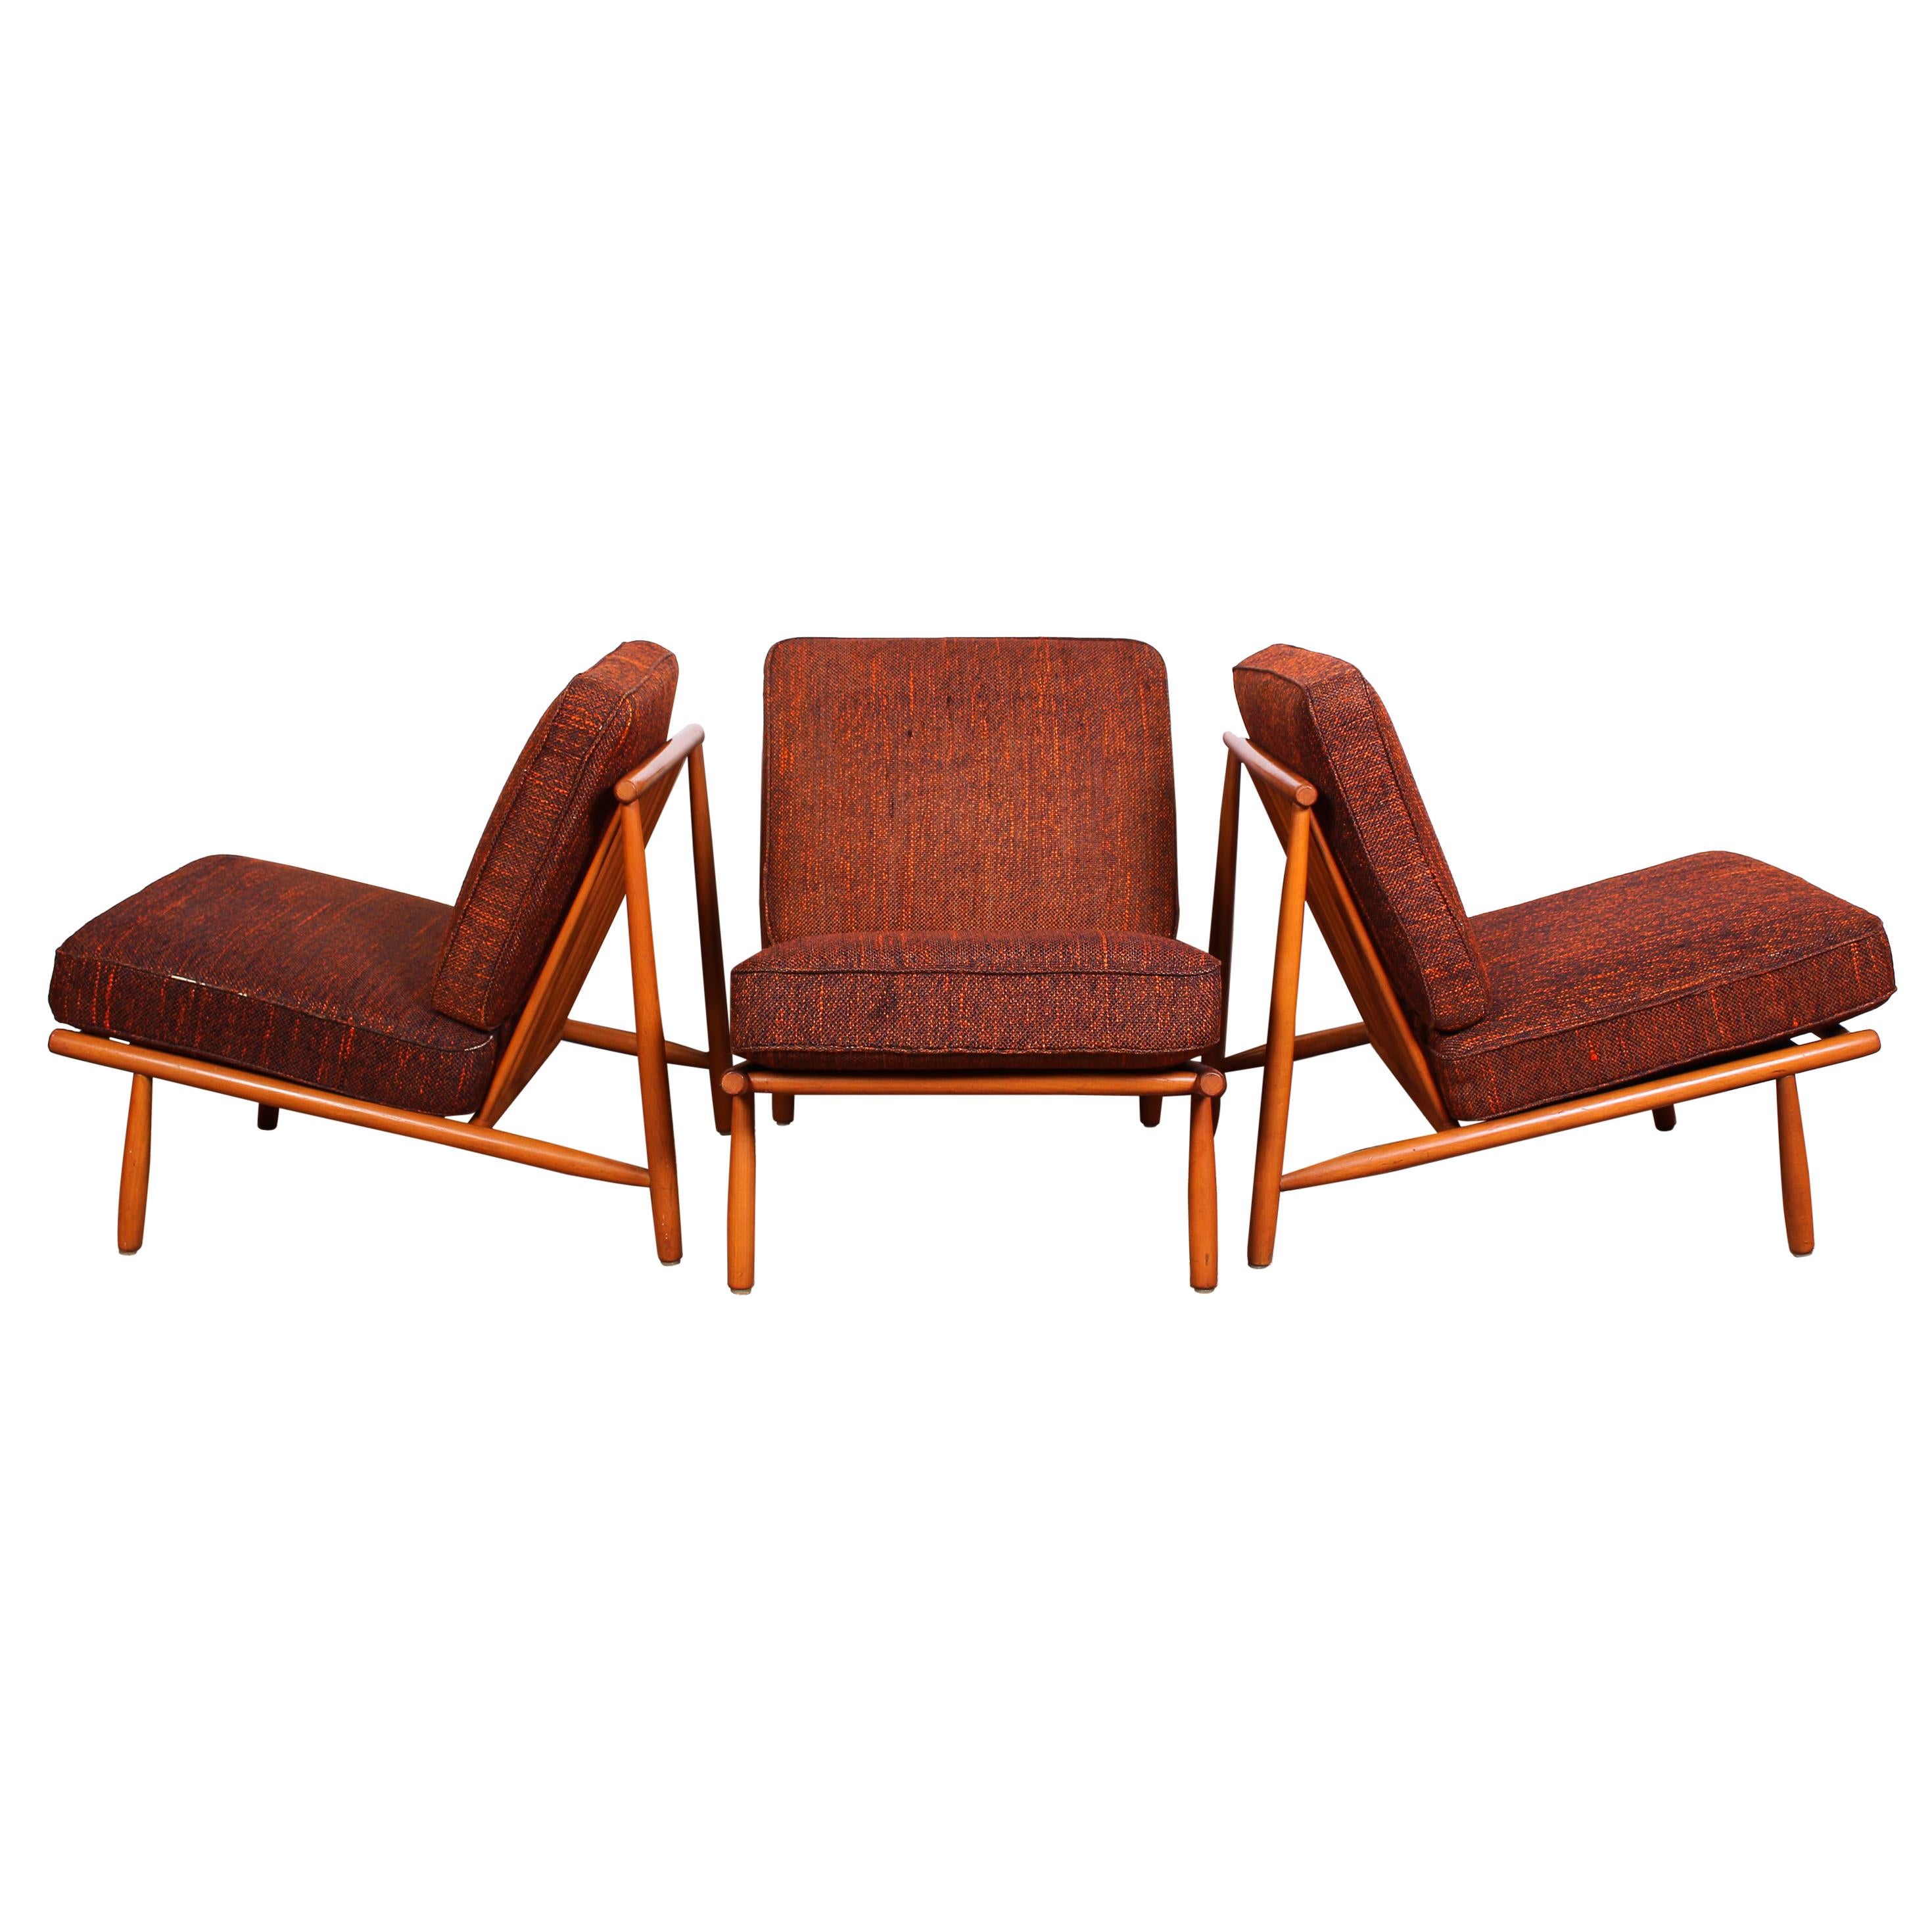 Midcentury Alf Svensson Easy Chairs by DUX, 1950s